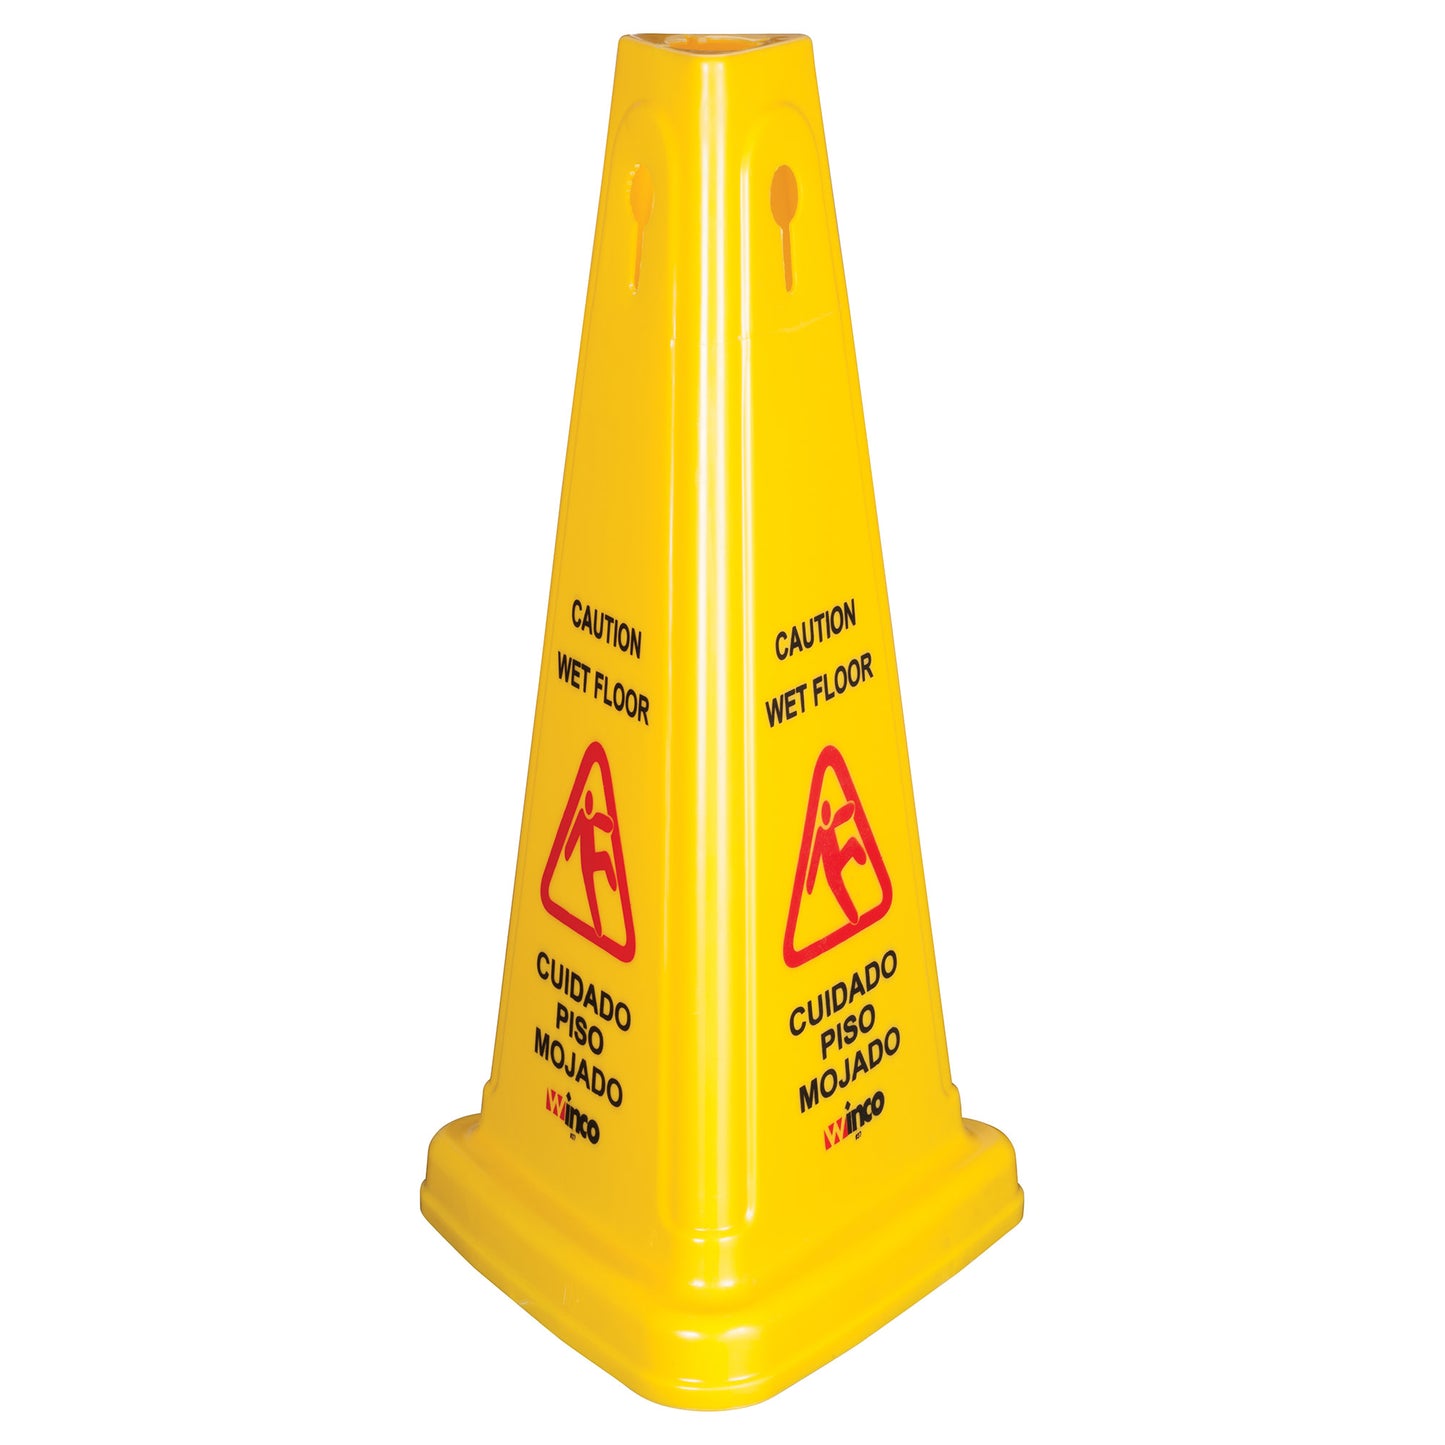 WCS-27T - Wet Floor Caution Sign, Cone-shaped, Yellow